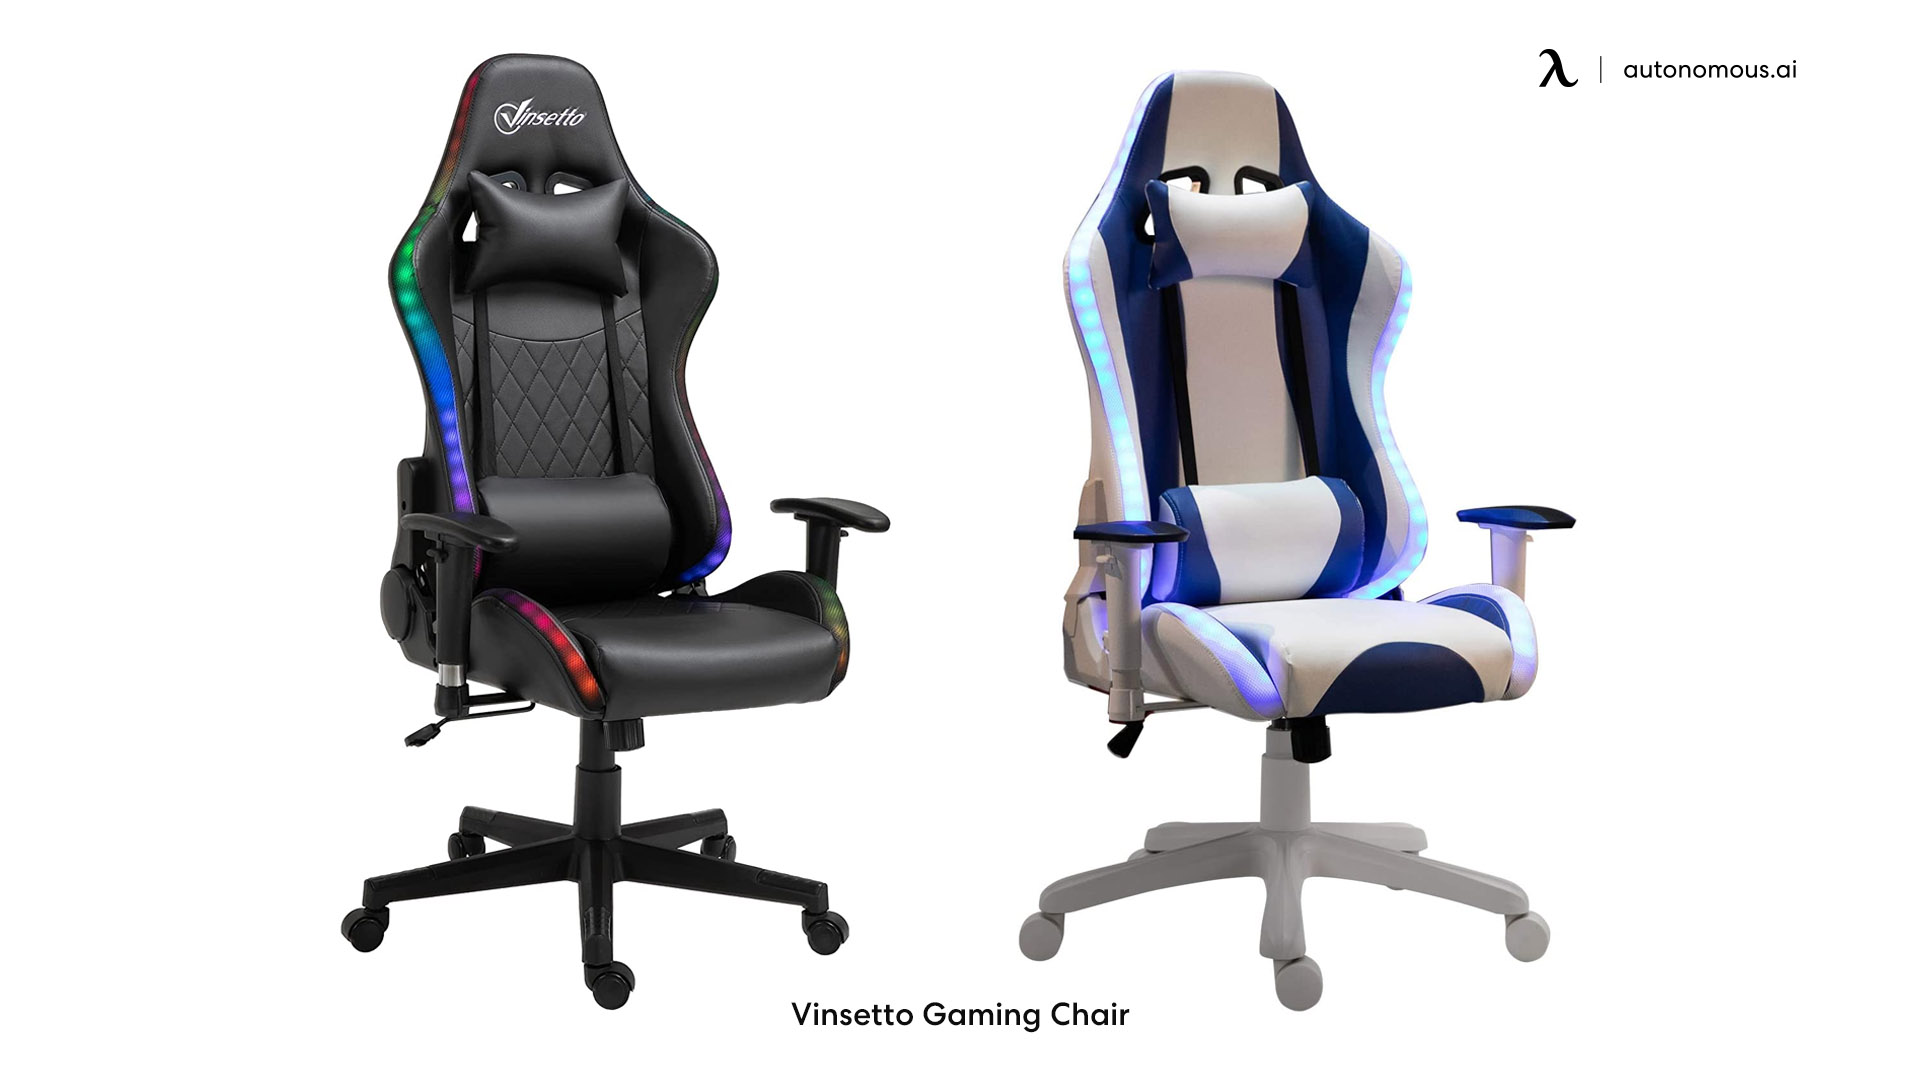 Vinsetto led gaming chair